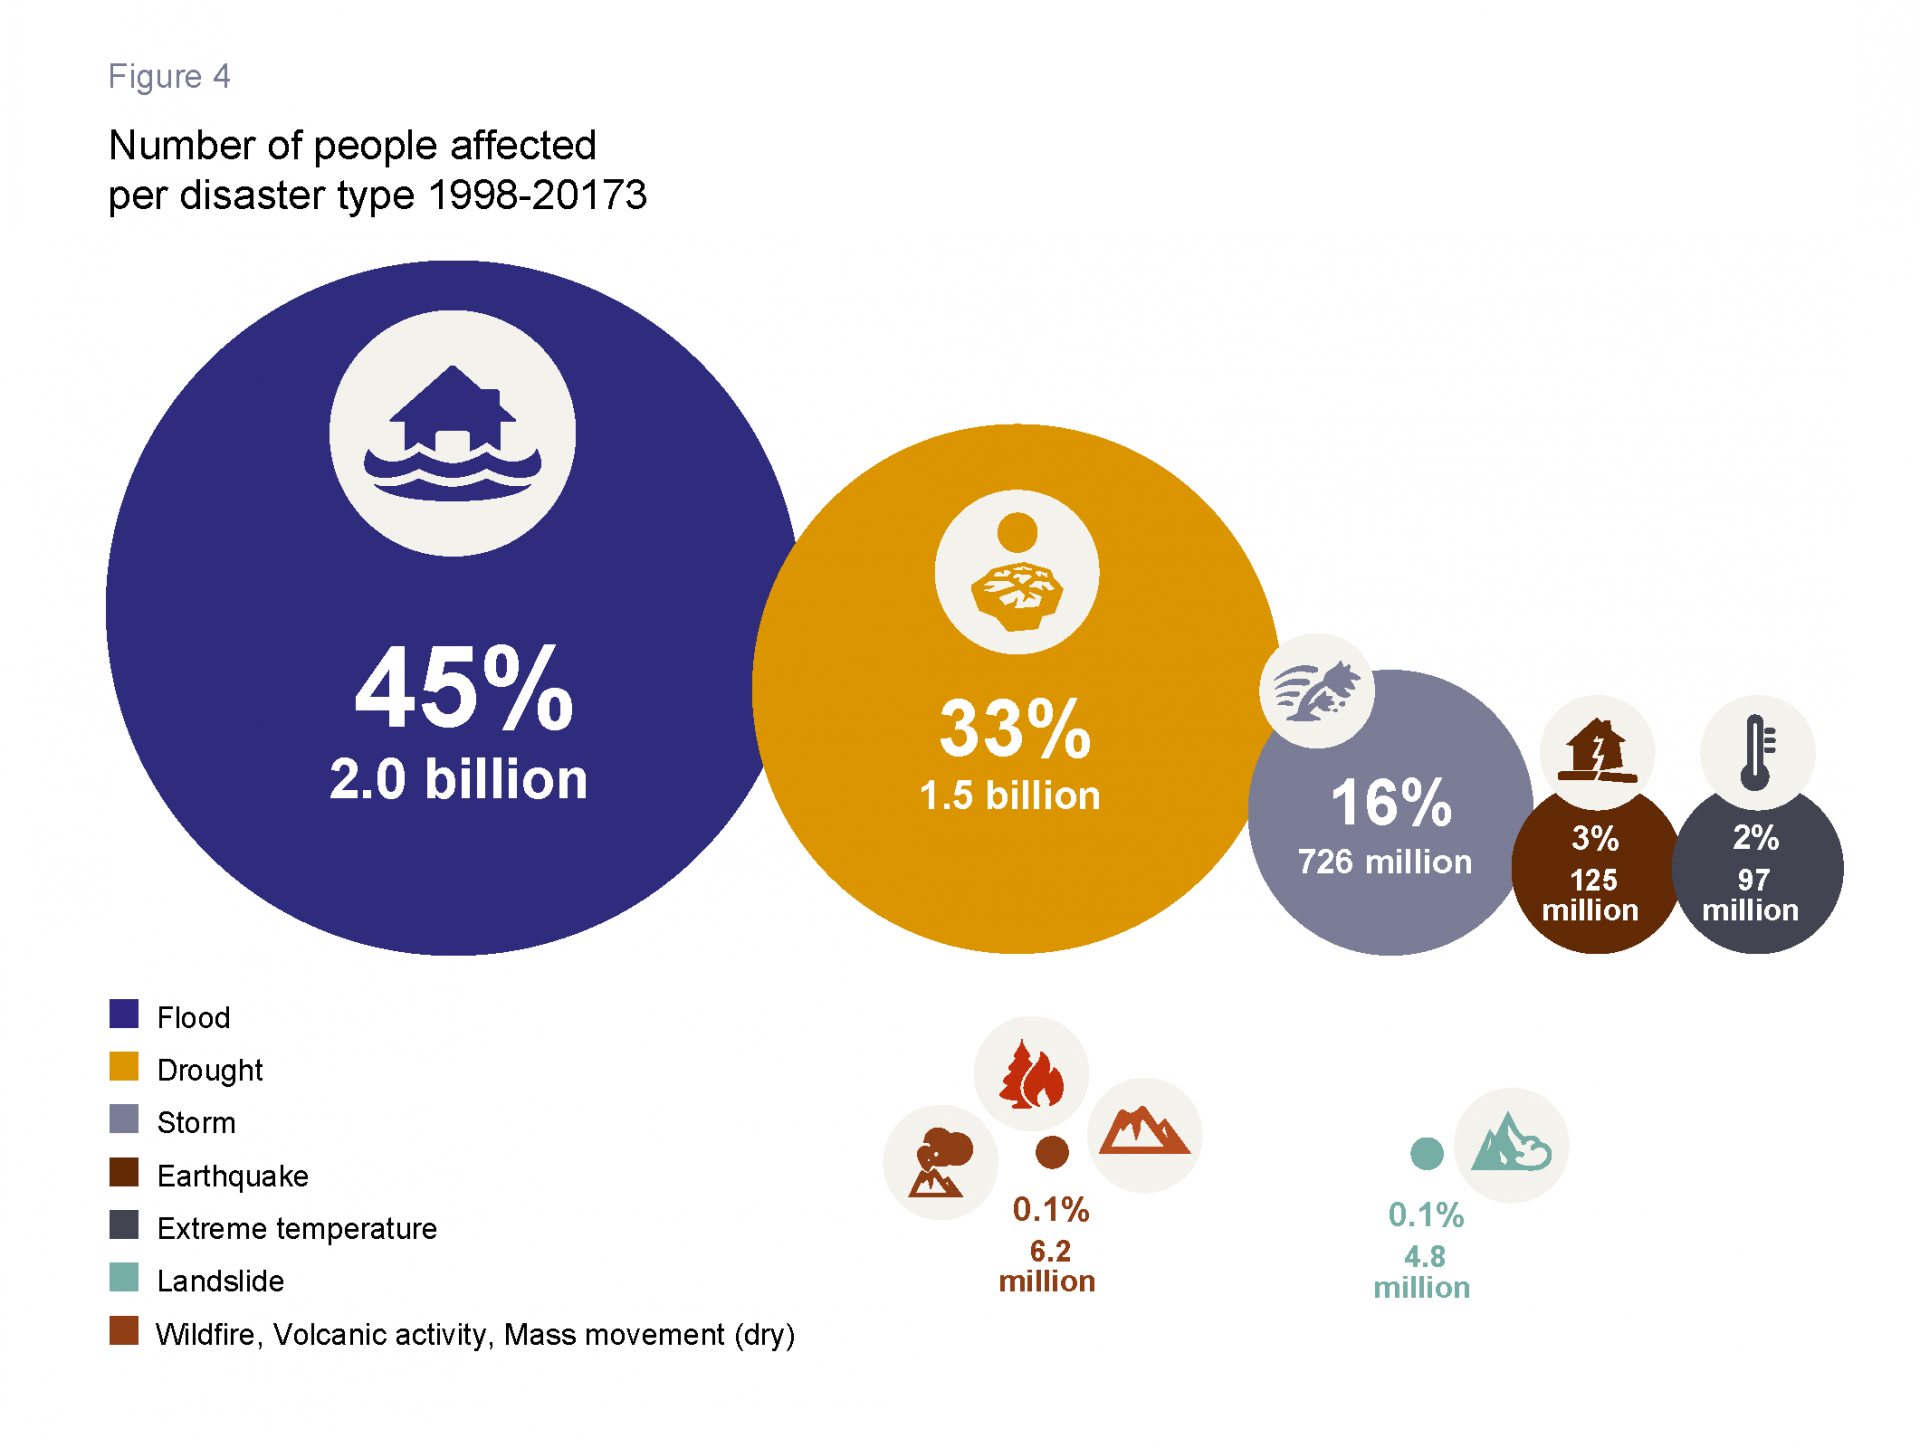 Number of people affected per disaster type